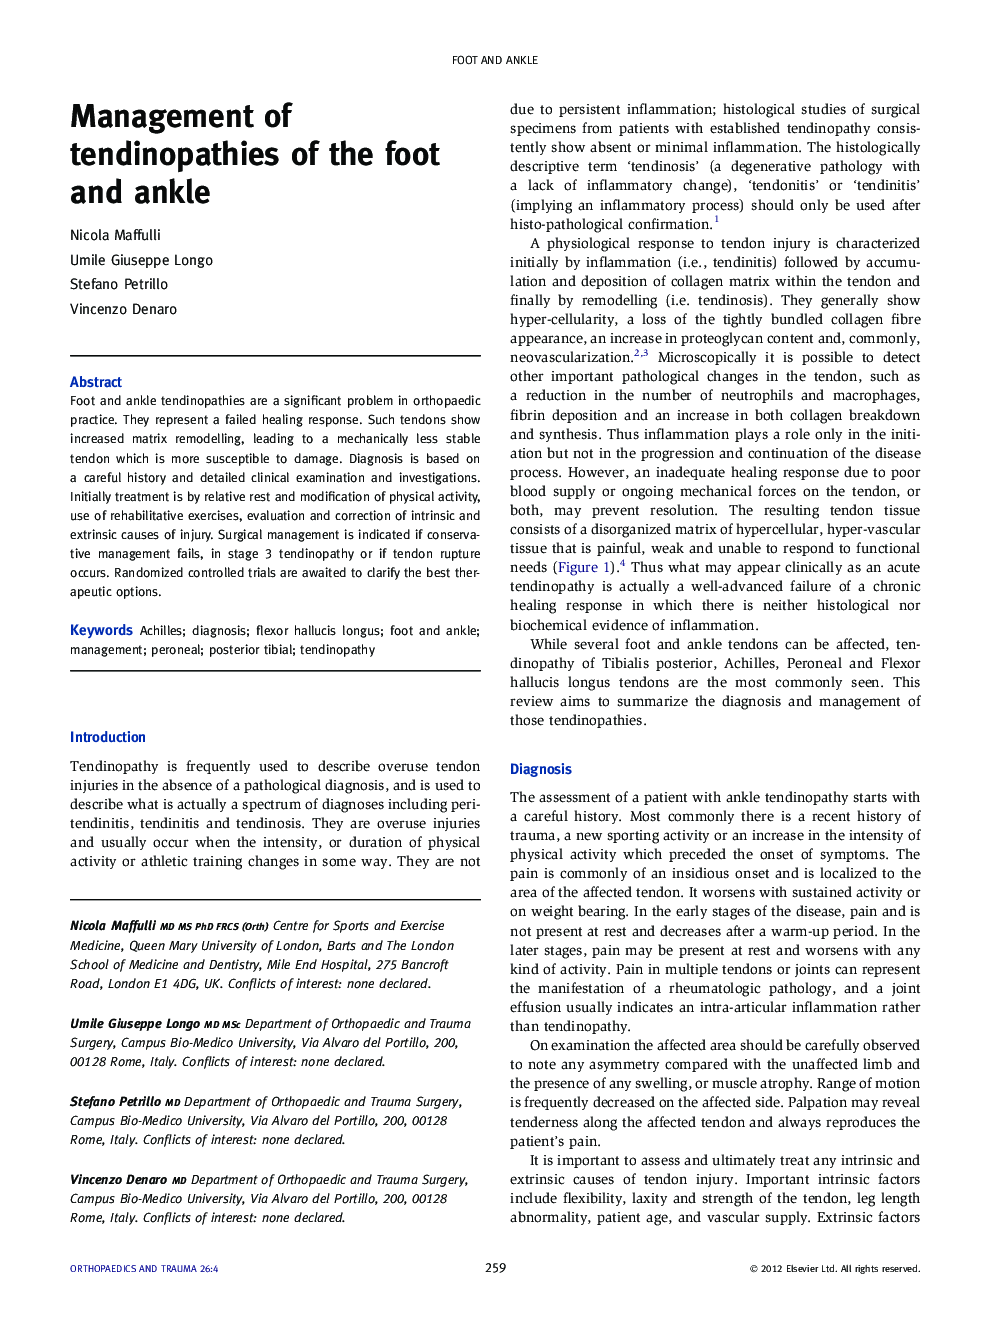 Management of tendinopathies of the foot and ankle